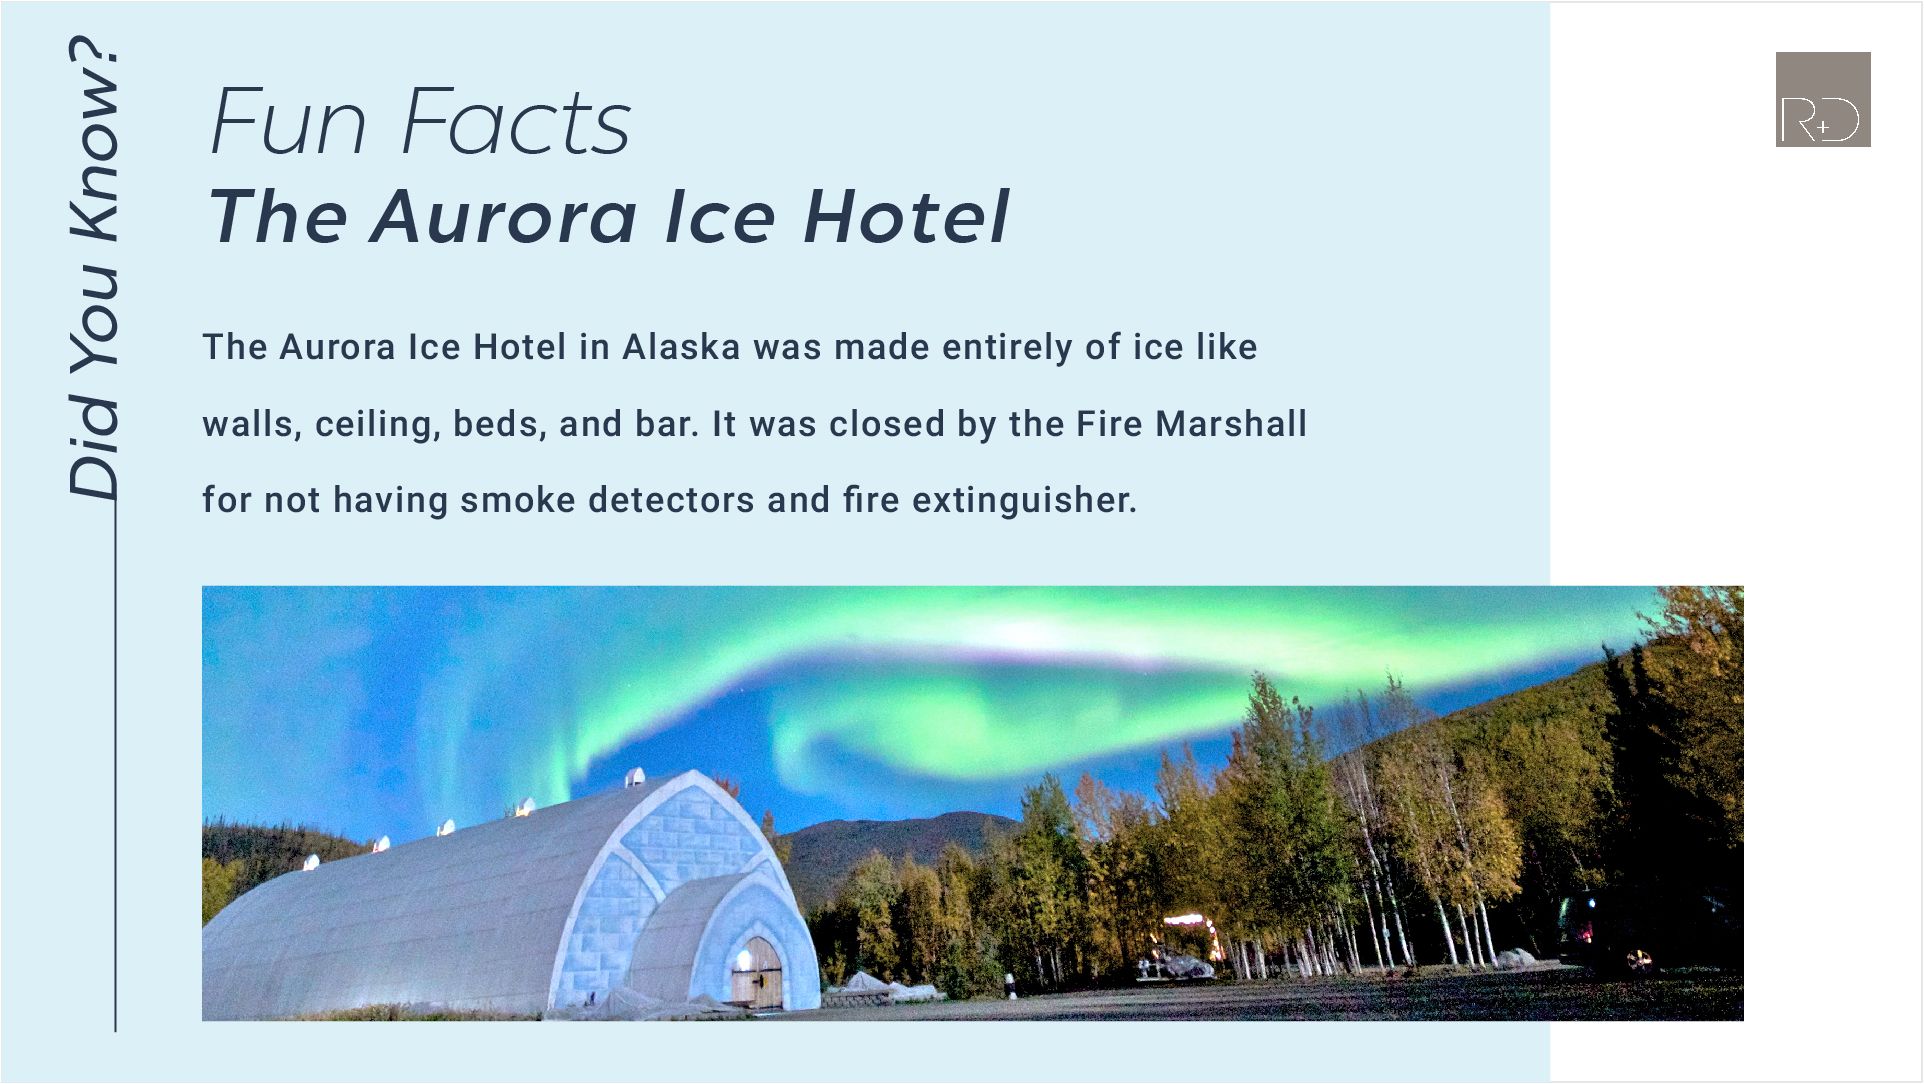 AEC Facts by Russell and Dawson - The Aurora Ice Hotel